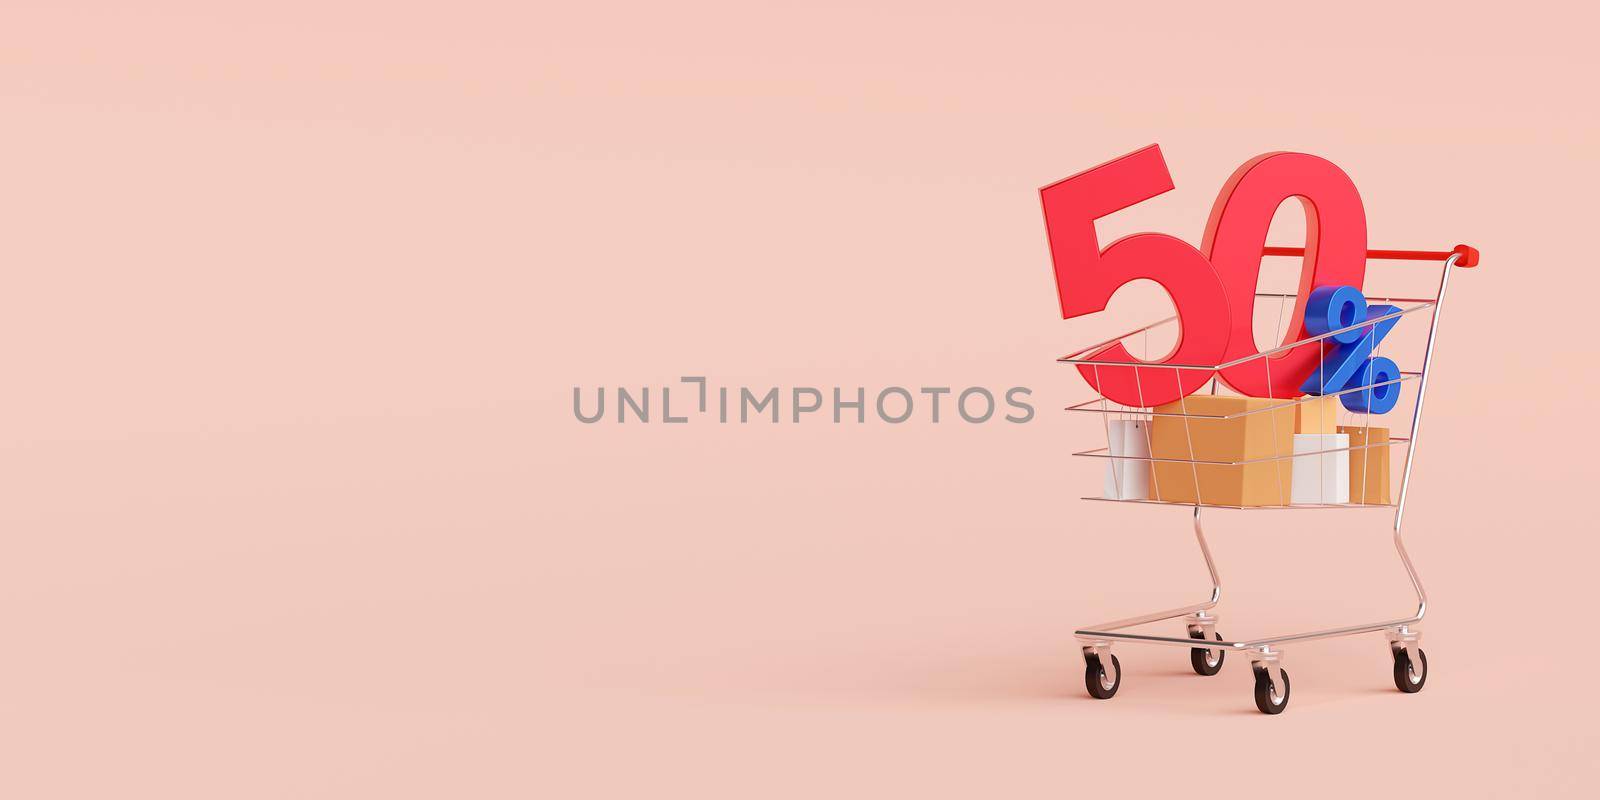 Shopping banner with special offer discount up to 50%, 3d illustration